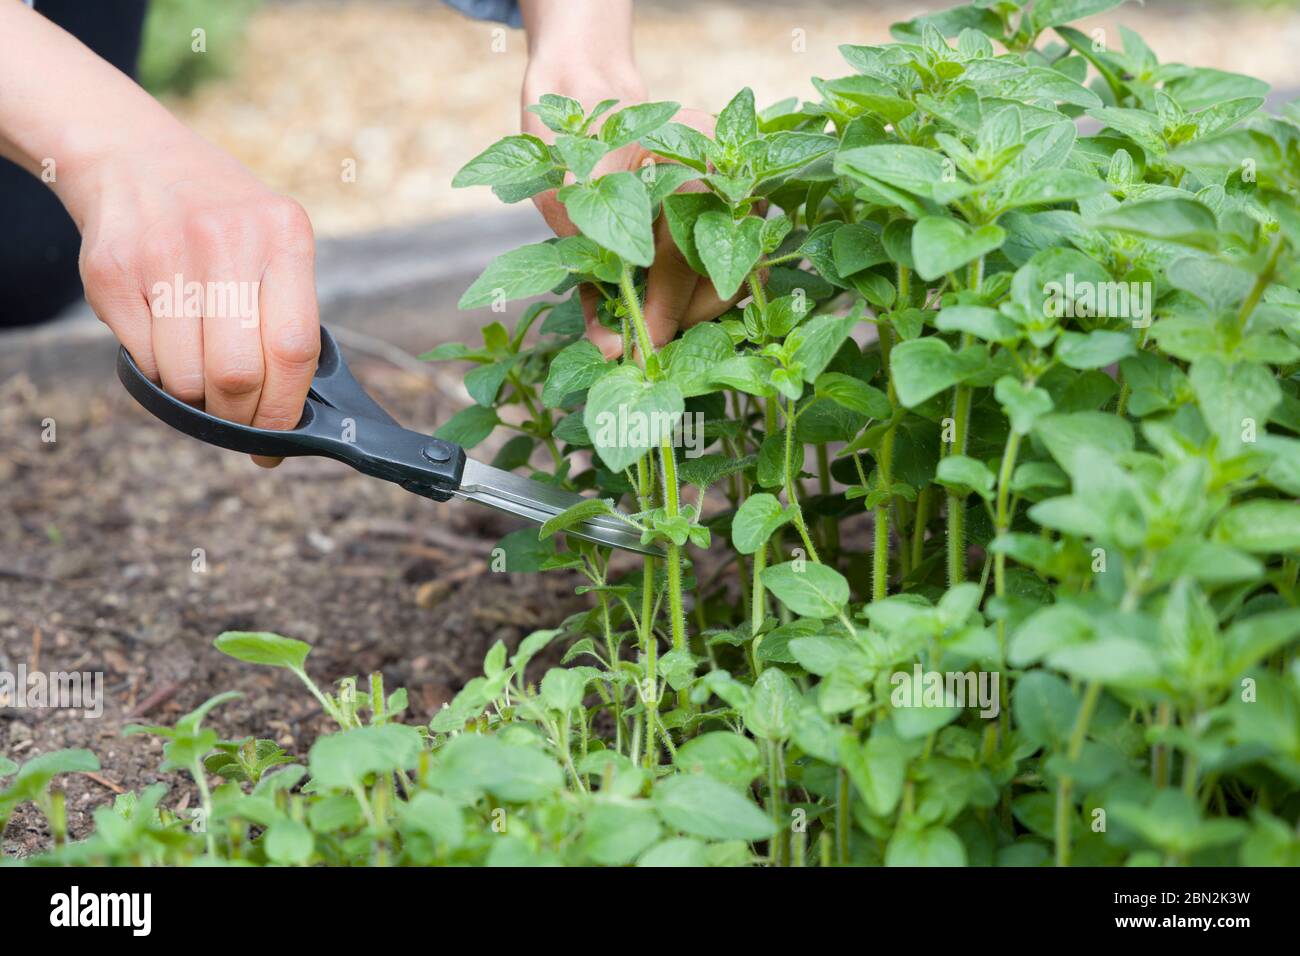 Woman growing and picking herbs (oregano) in a herb garden, UK Stock Photo